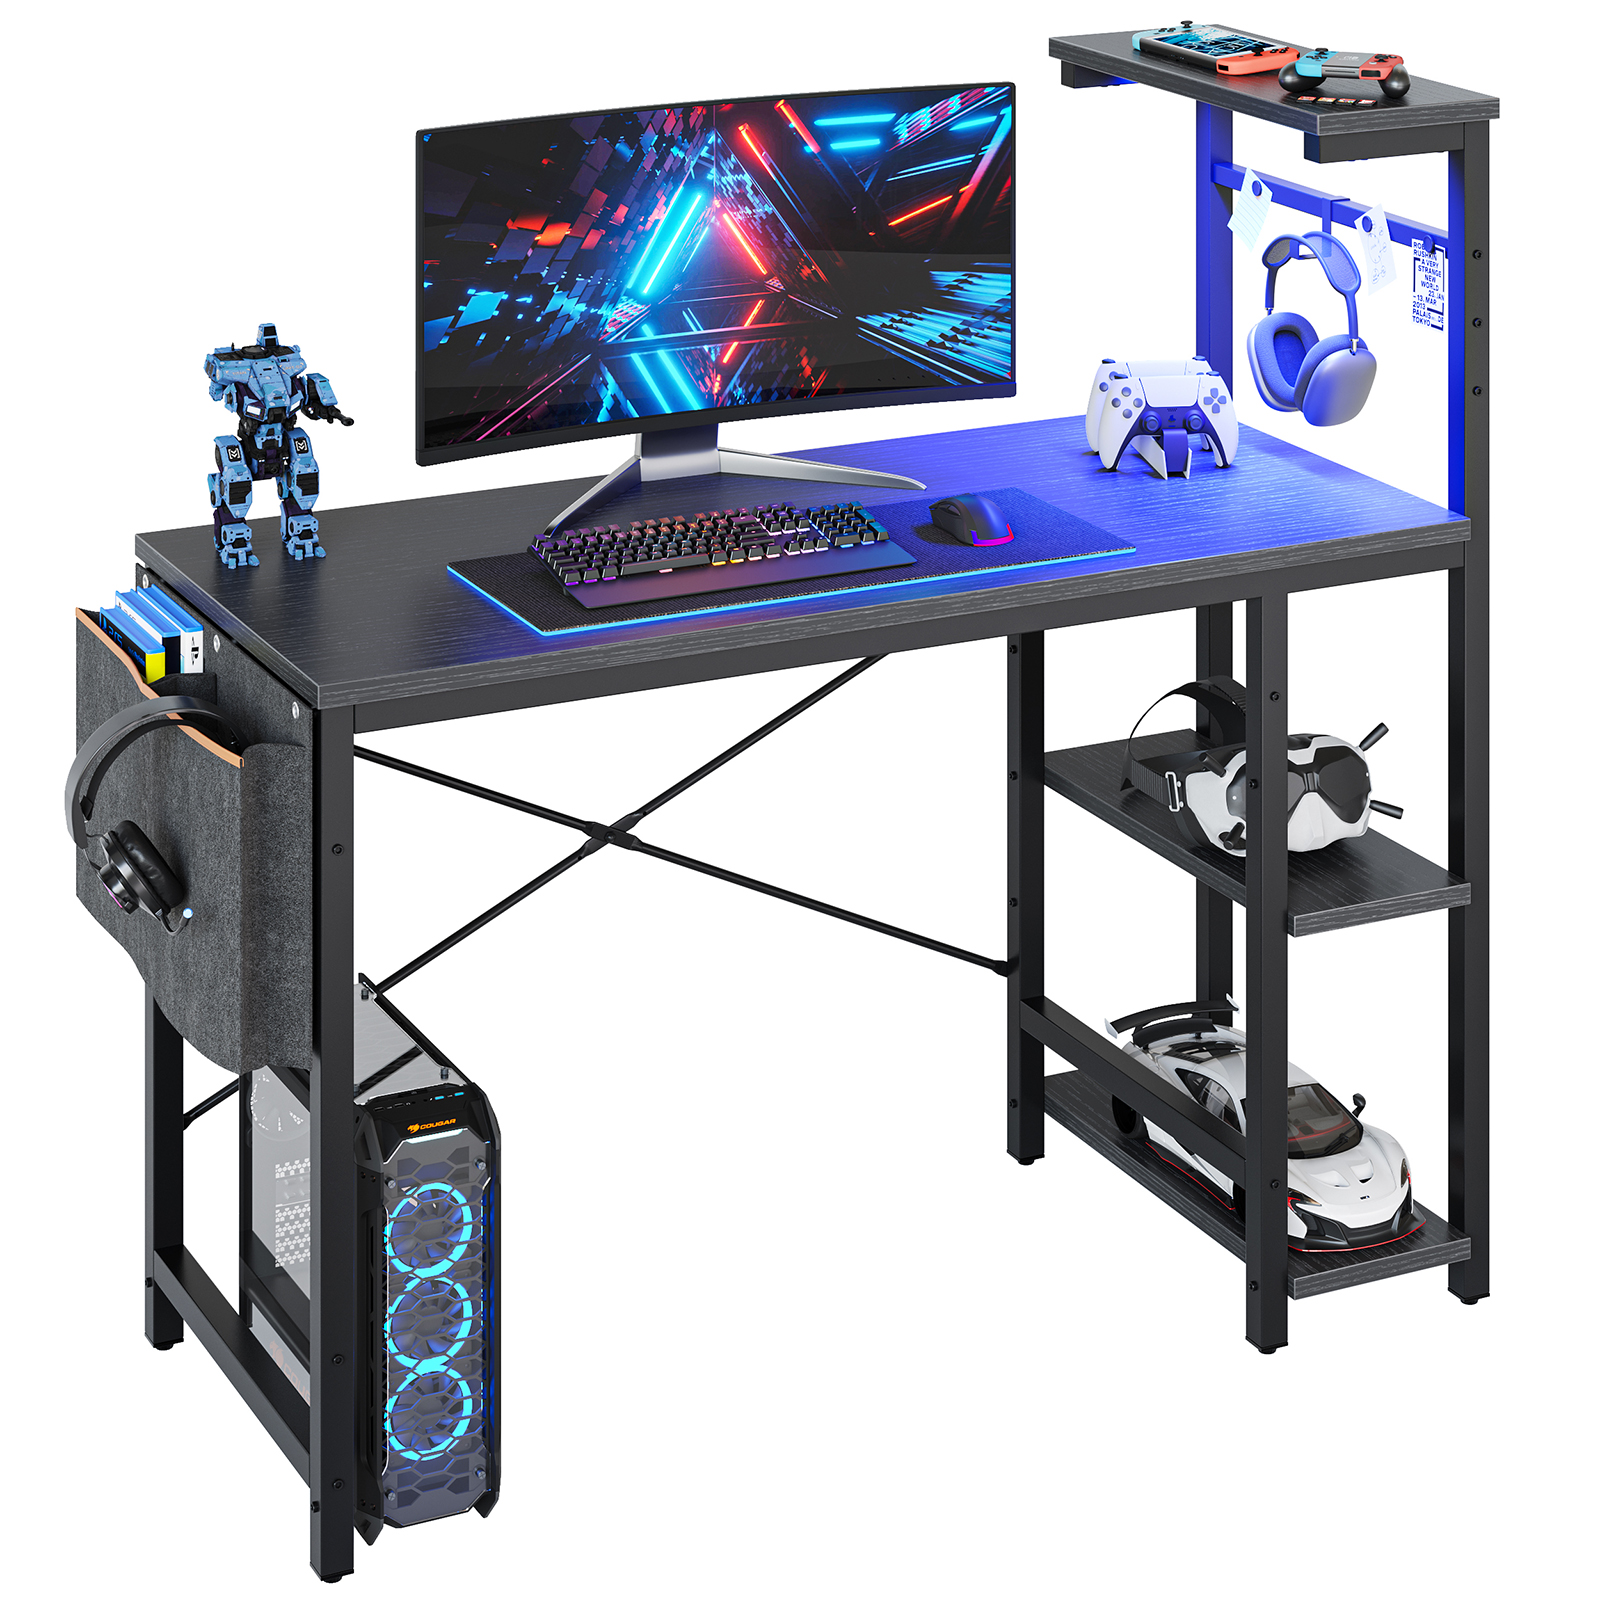 Bestier Reversible 44 inch Computer Desk with LED Lights Gaming Desk with 4 Tier Shelves Black - image 4 of 9